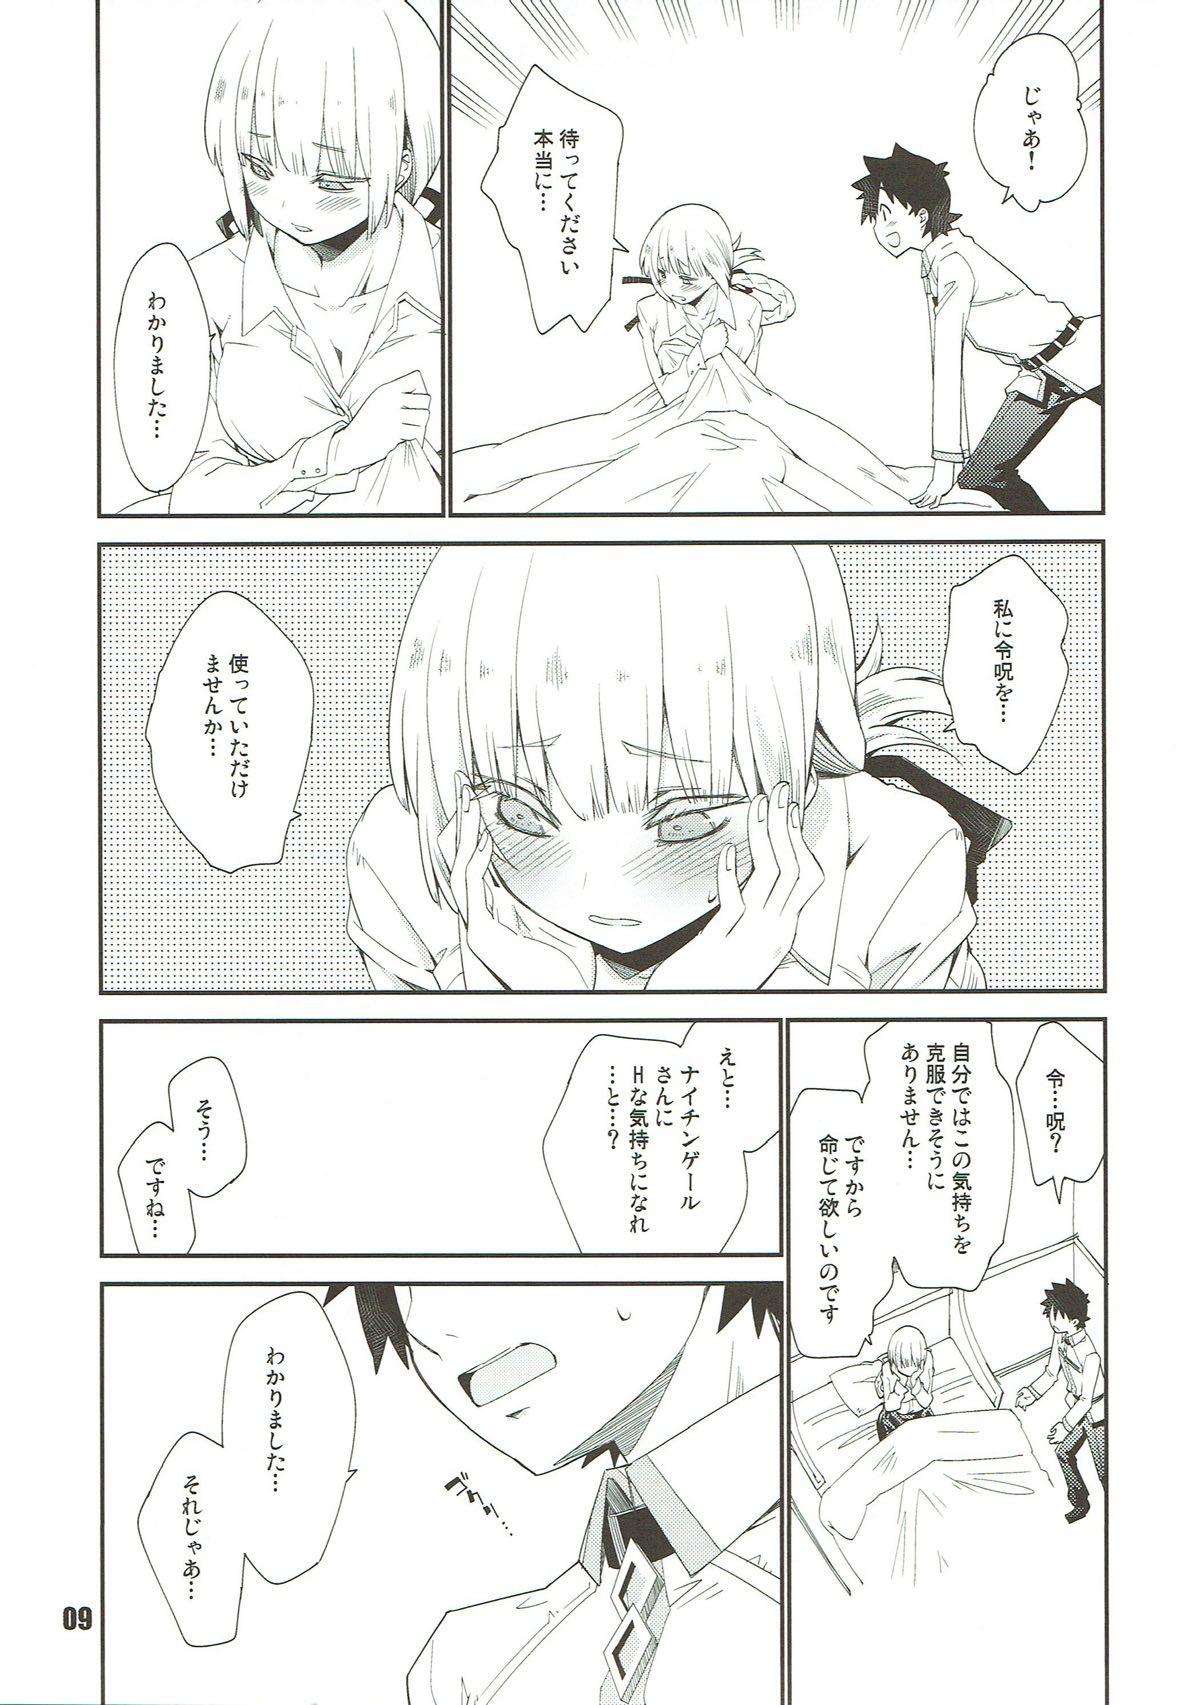 Teasing Nightingale Syndrome - Fate grand order Teen Hardcore - Page 8